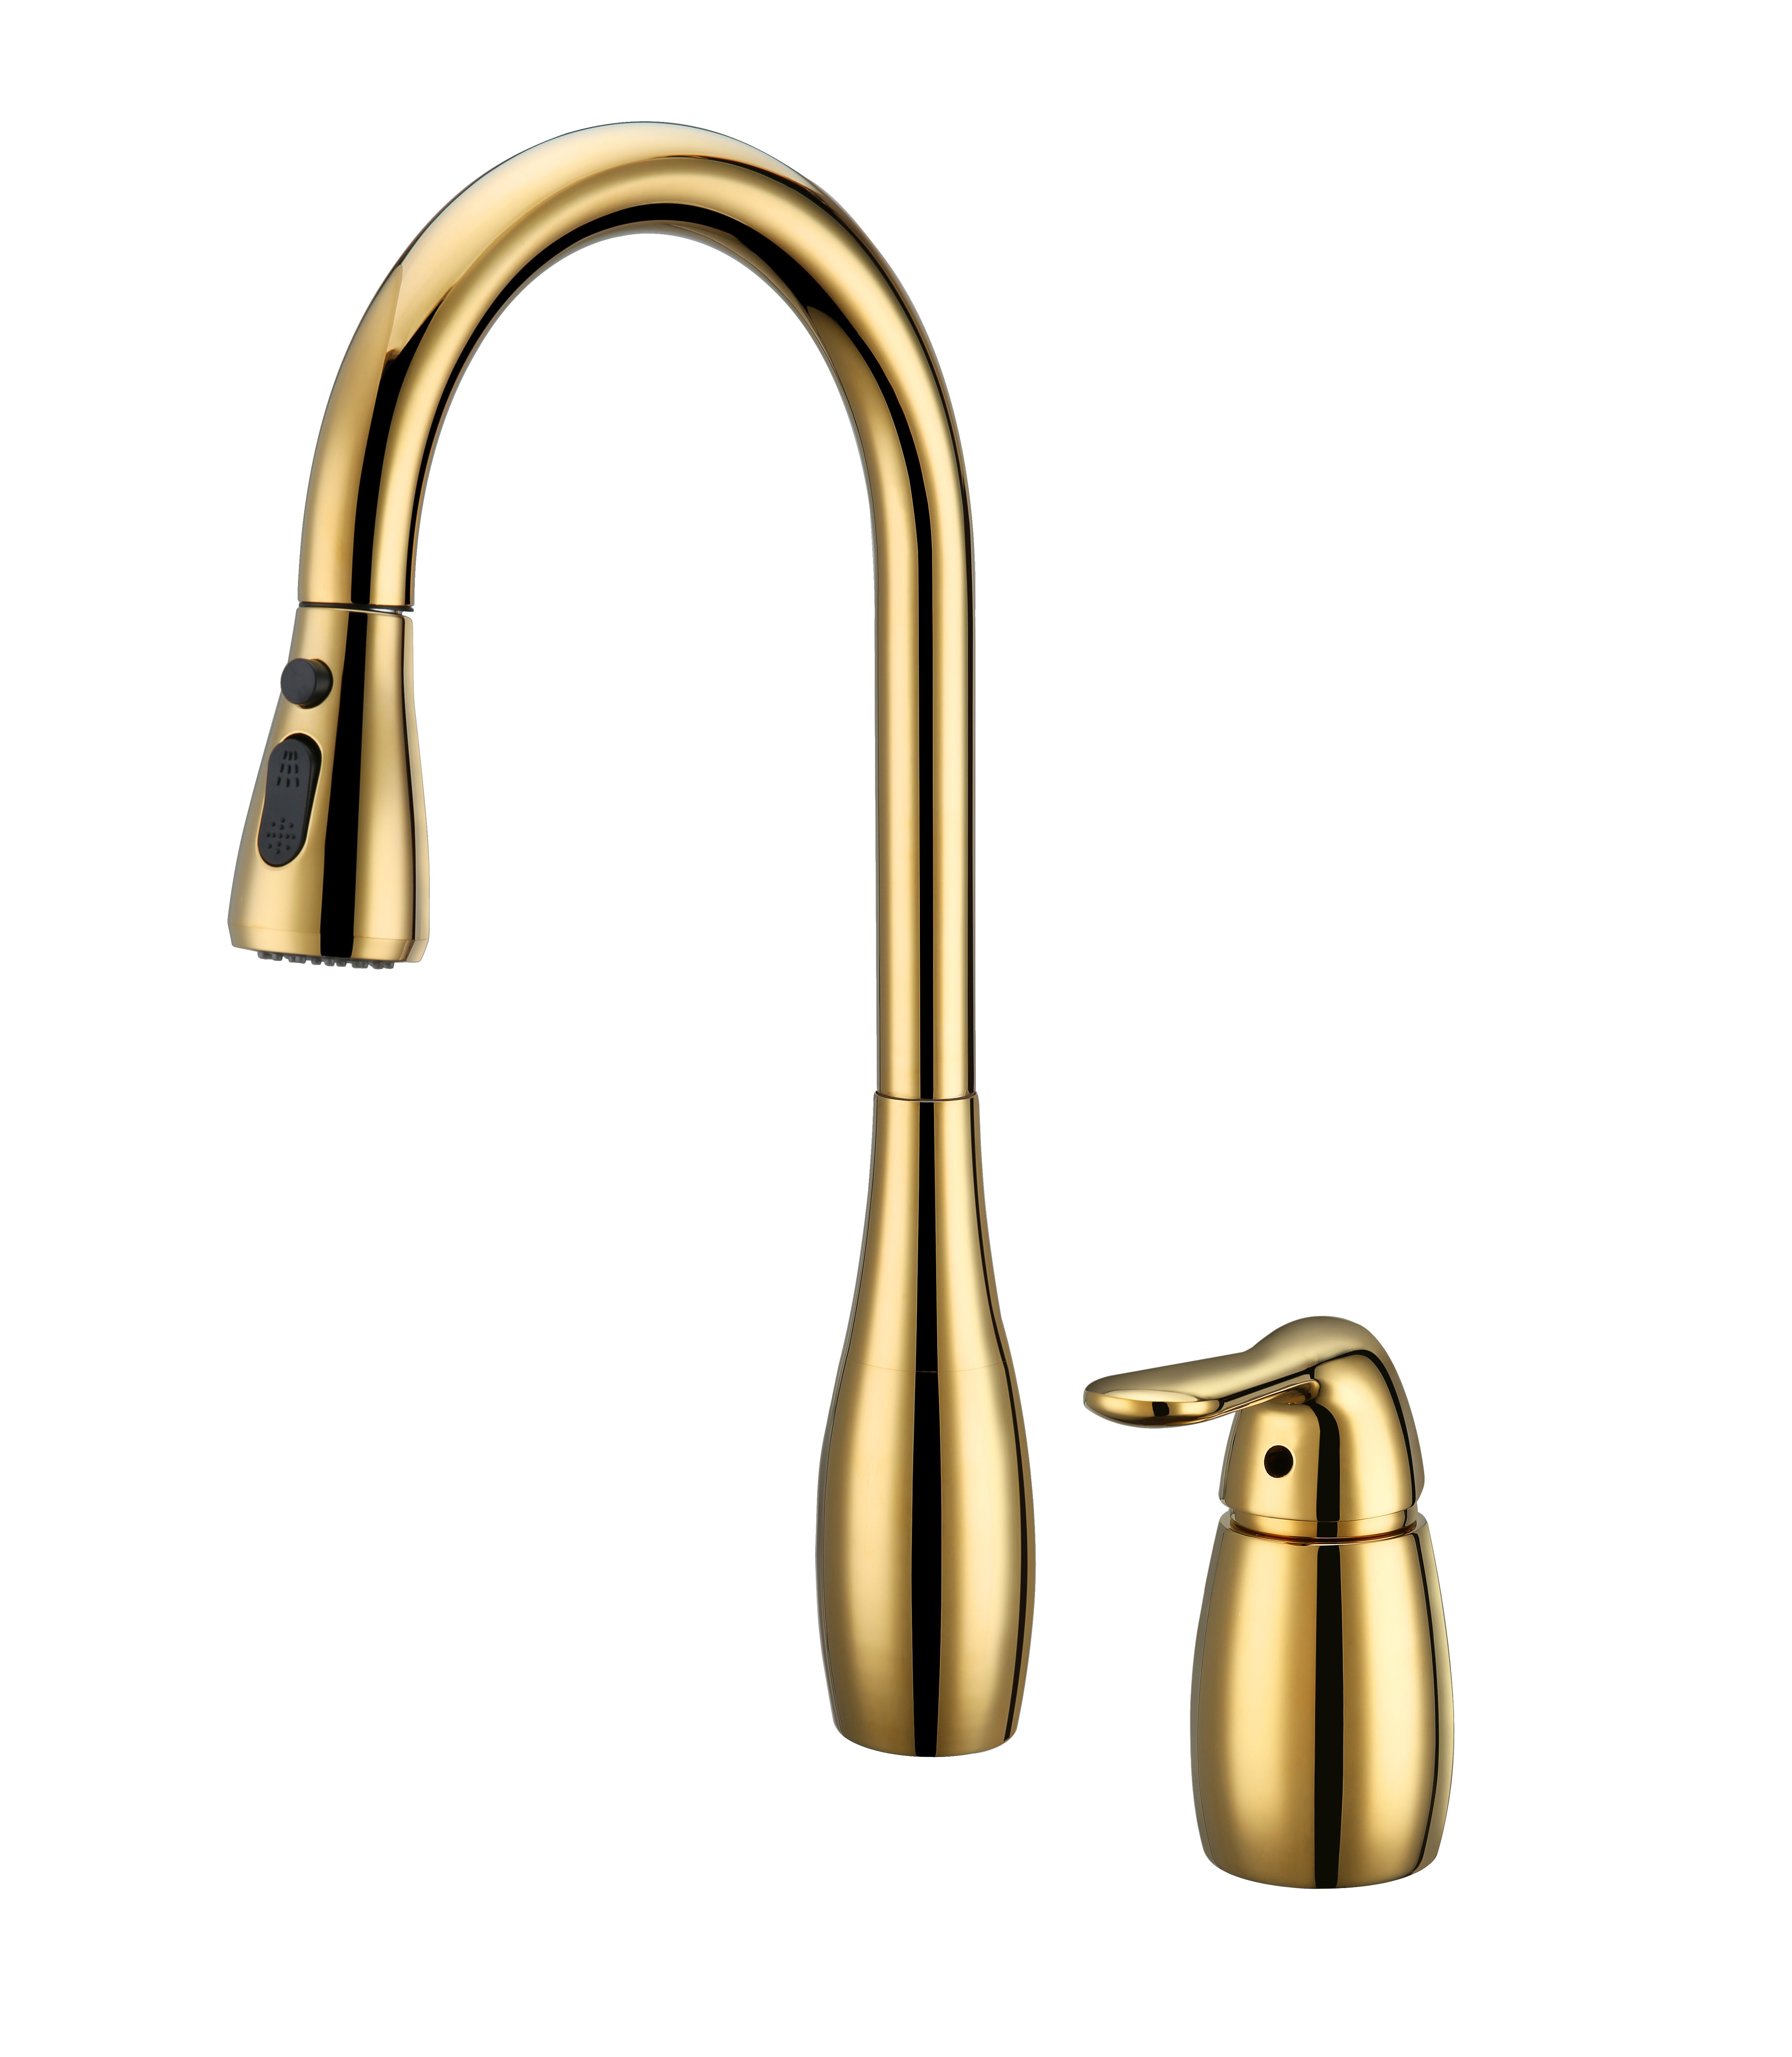 2020 Gold Pvd Single Handle Widespread Kitchen Faucet Kitchen 2 Holes Deck Mounted From Kavinxiaoyi